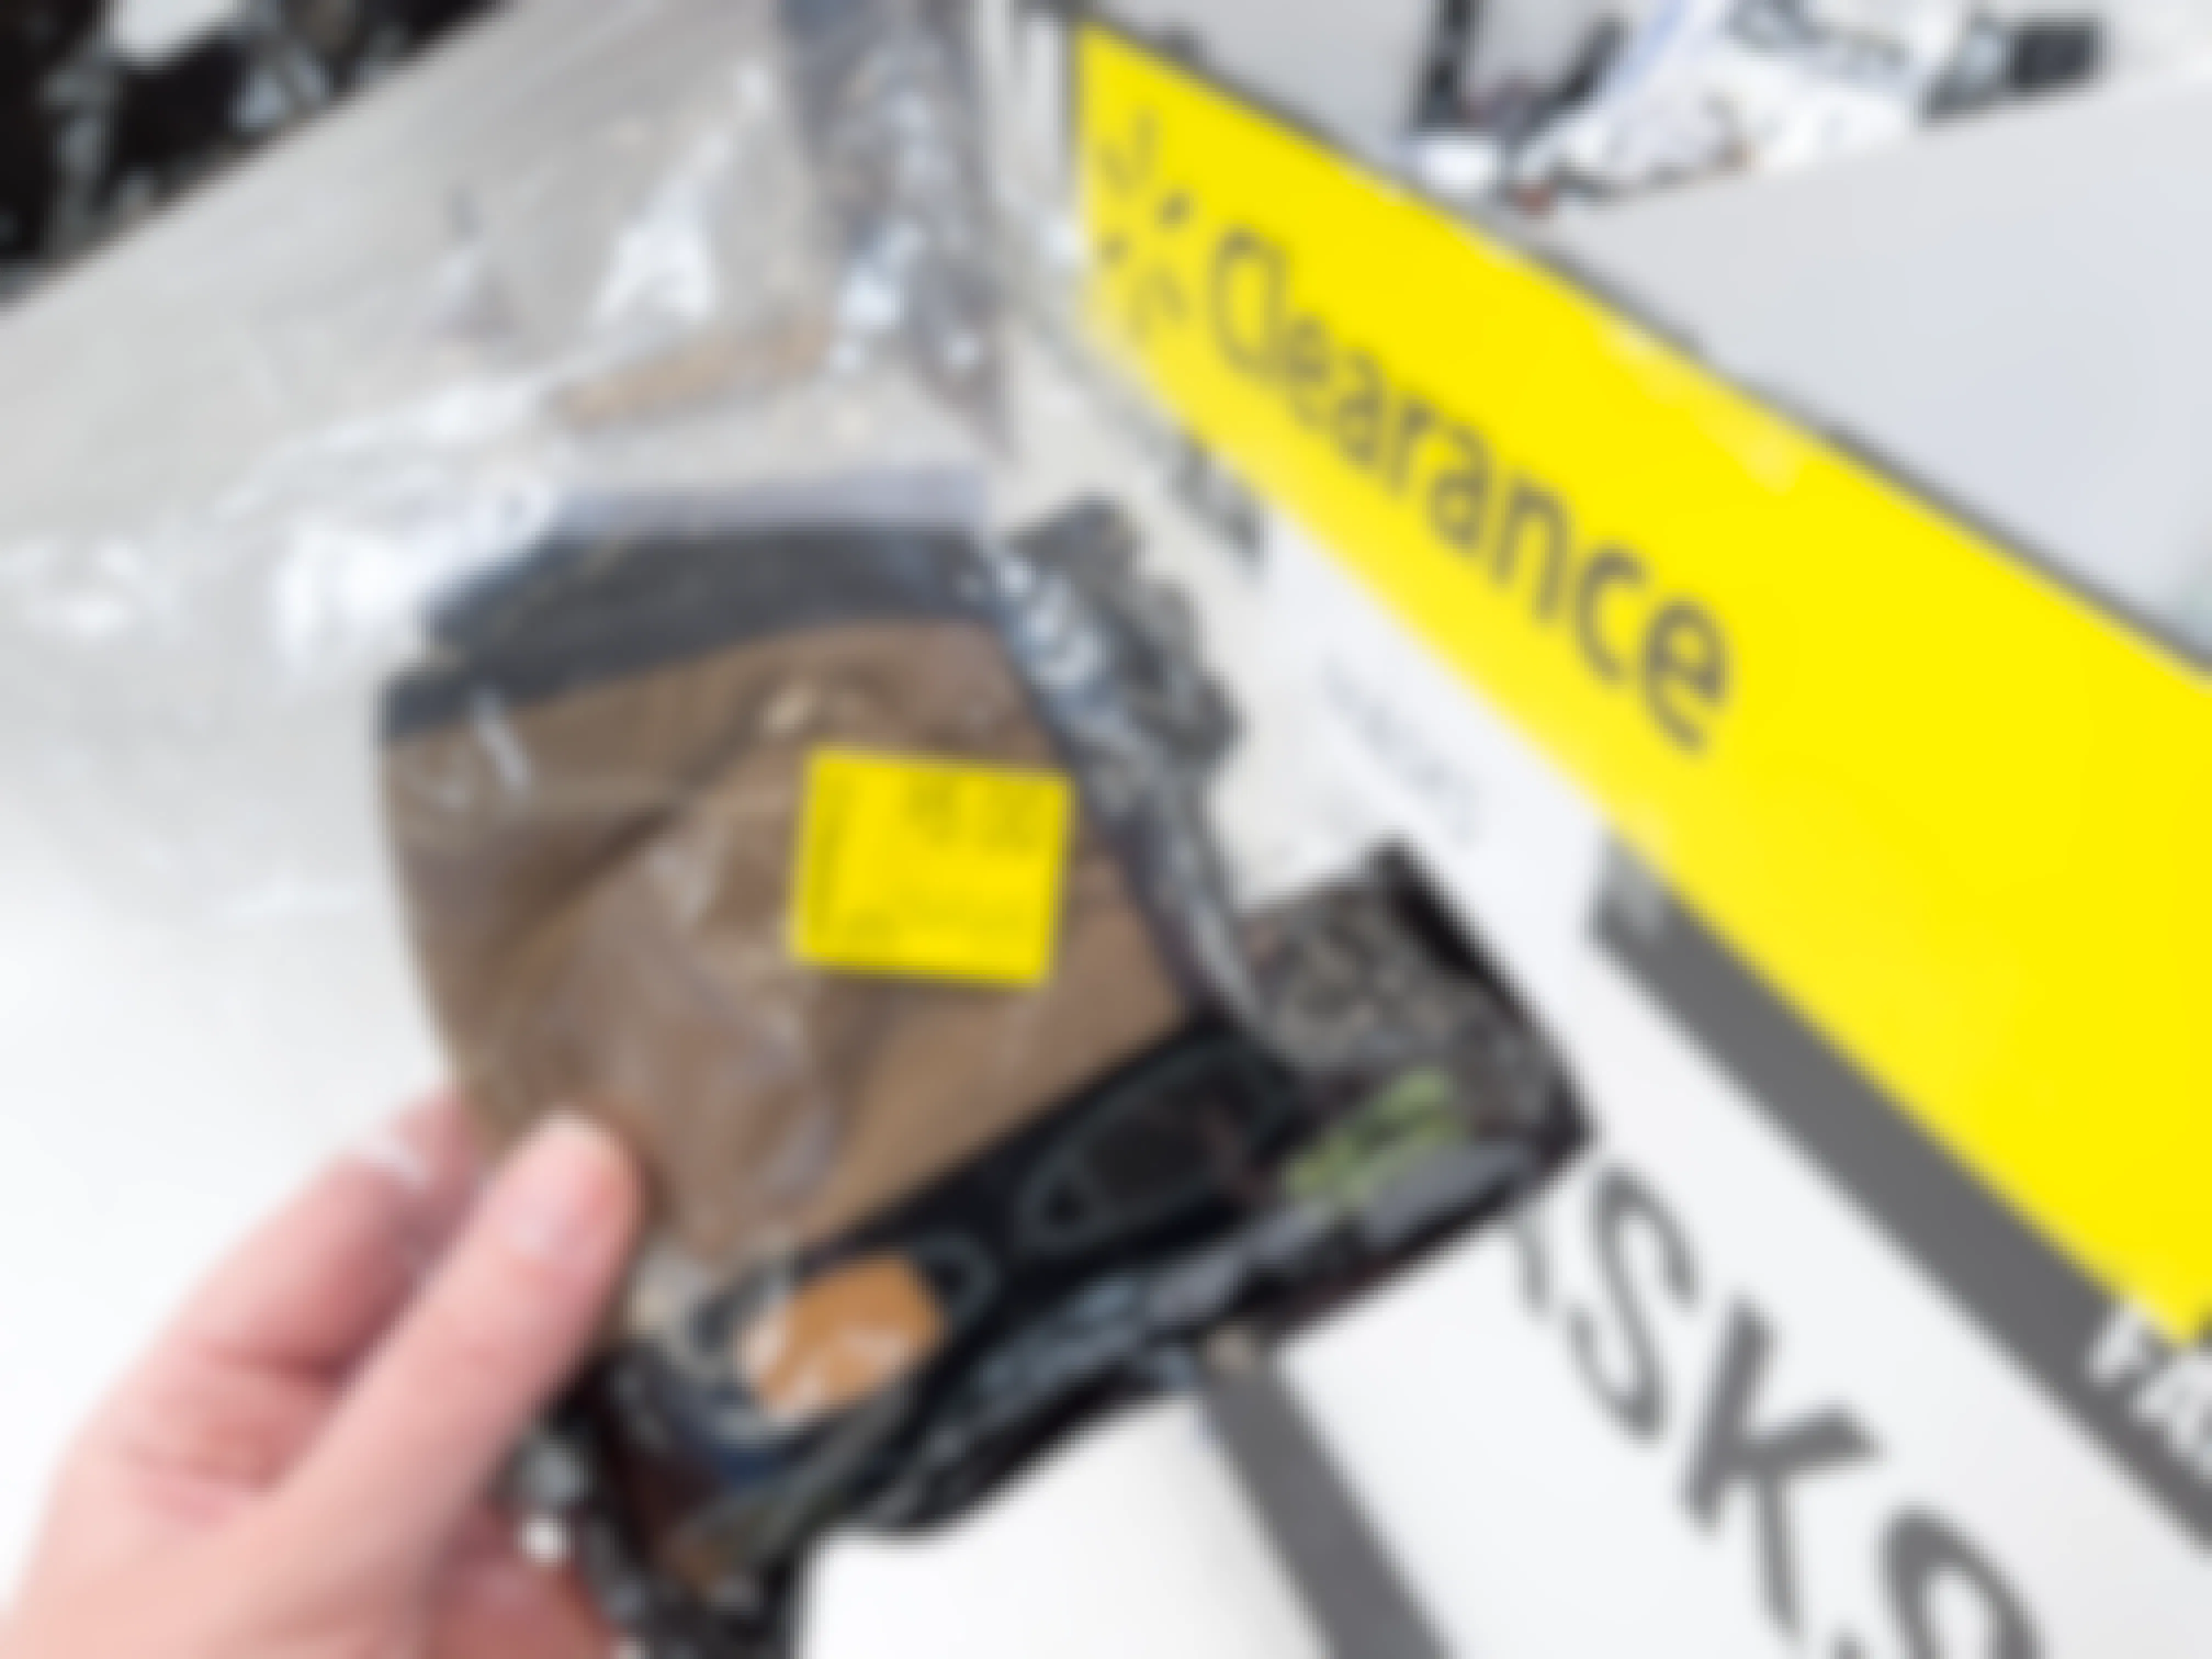 A pack of face coverings with a yellow clearance sticker on them